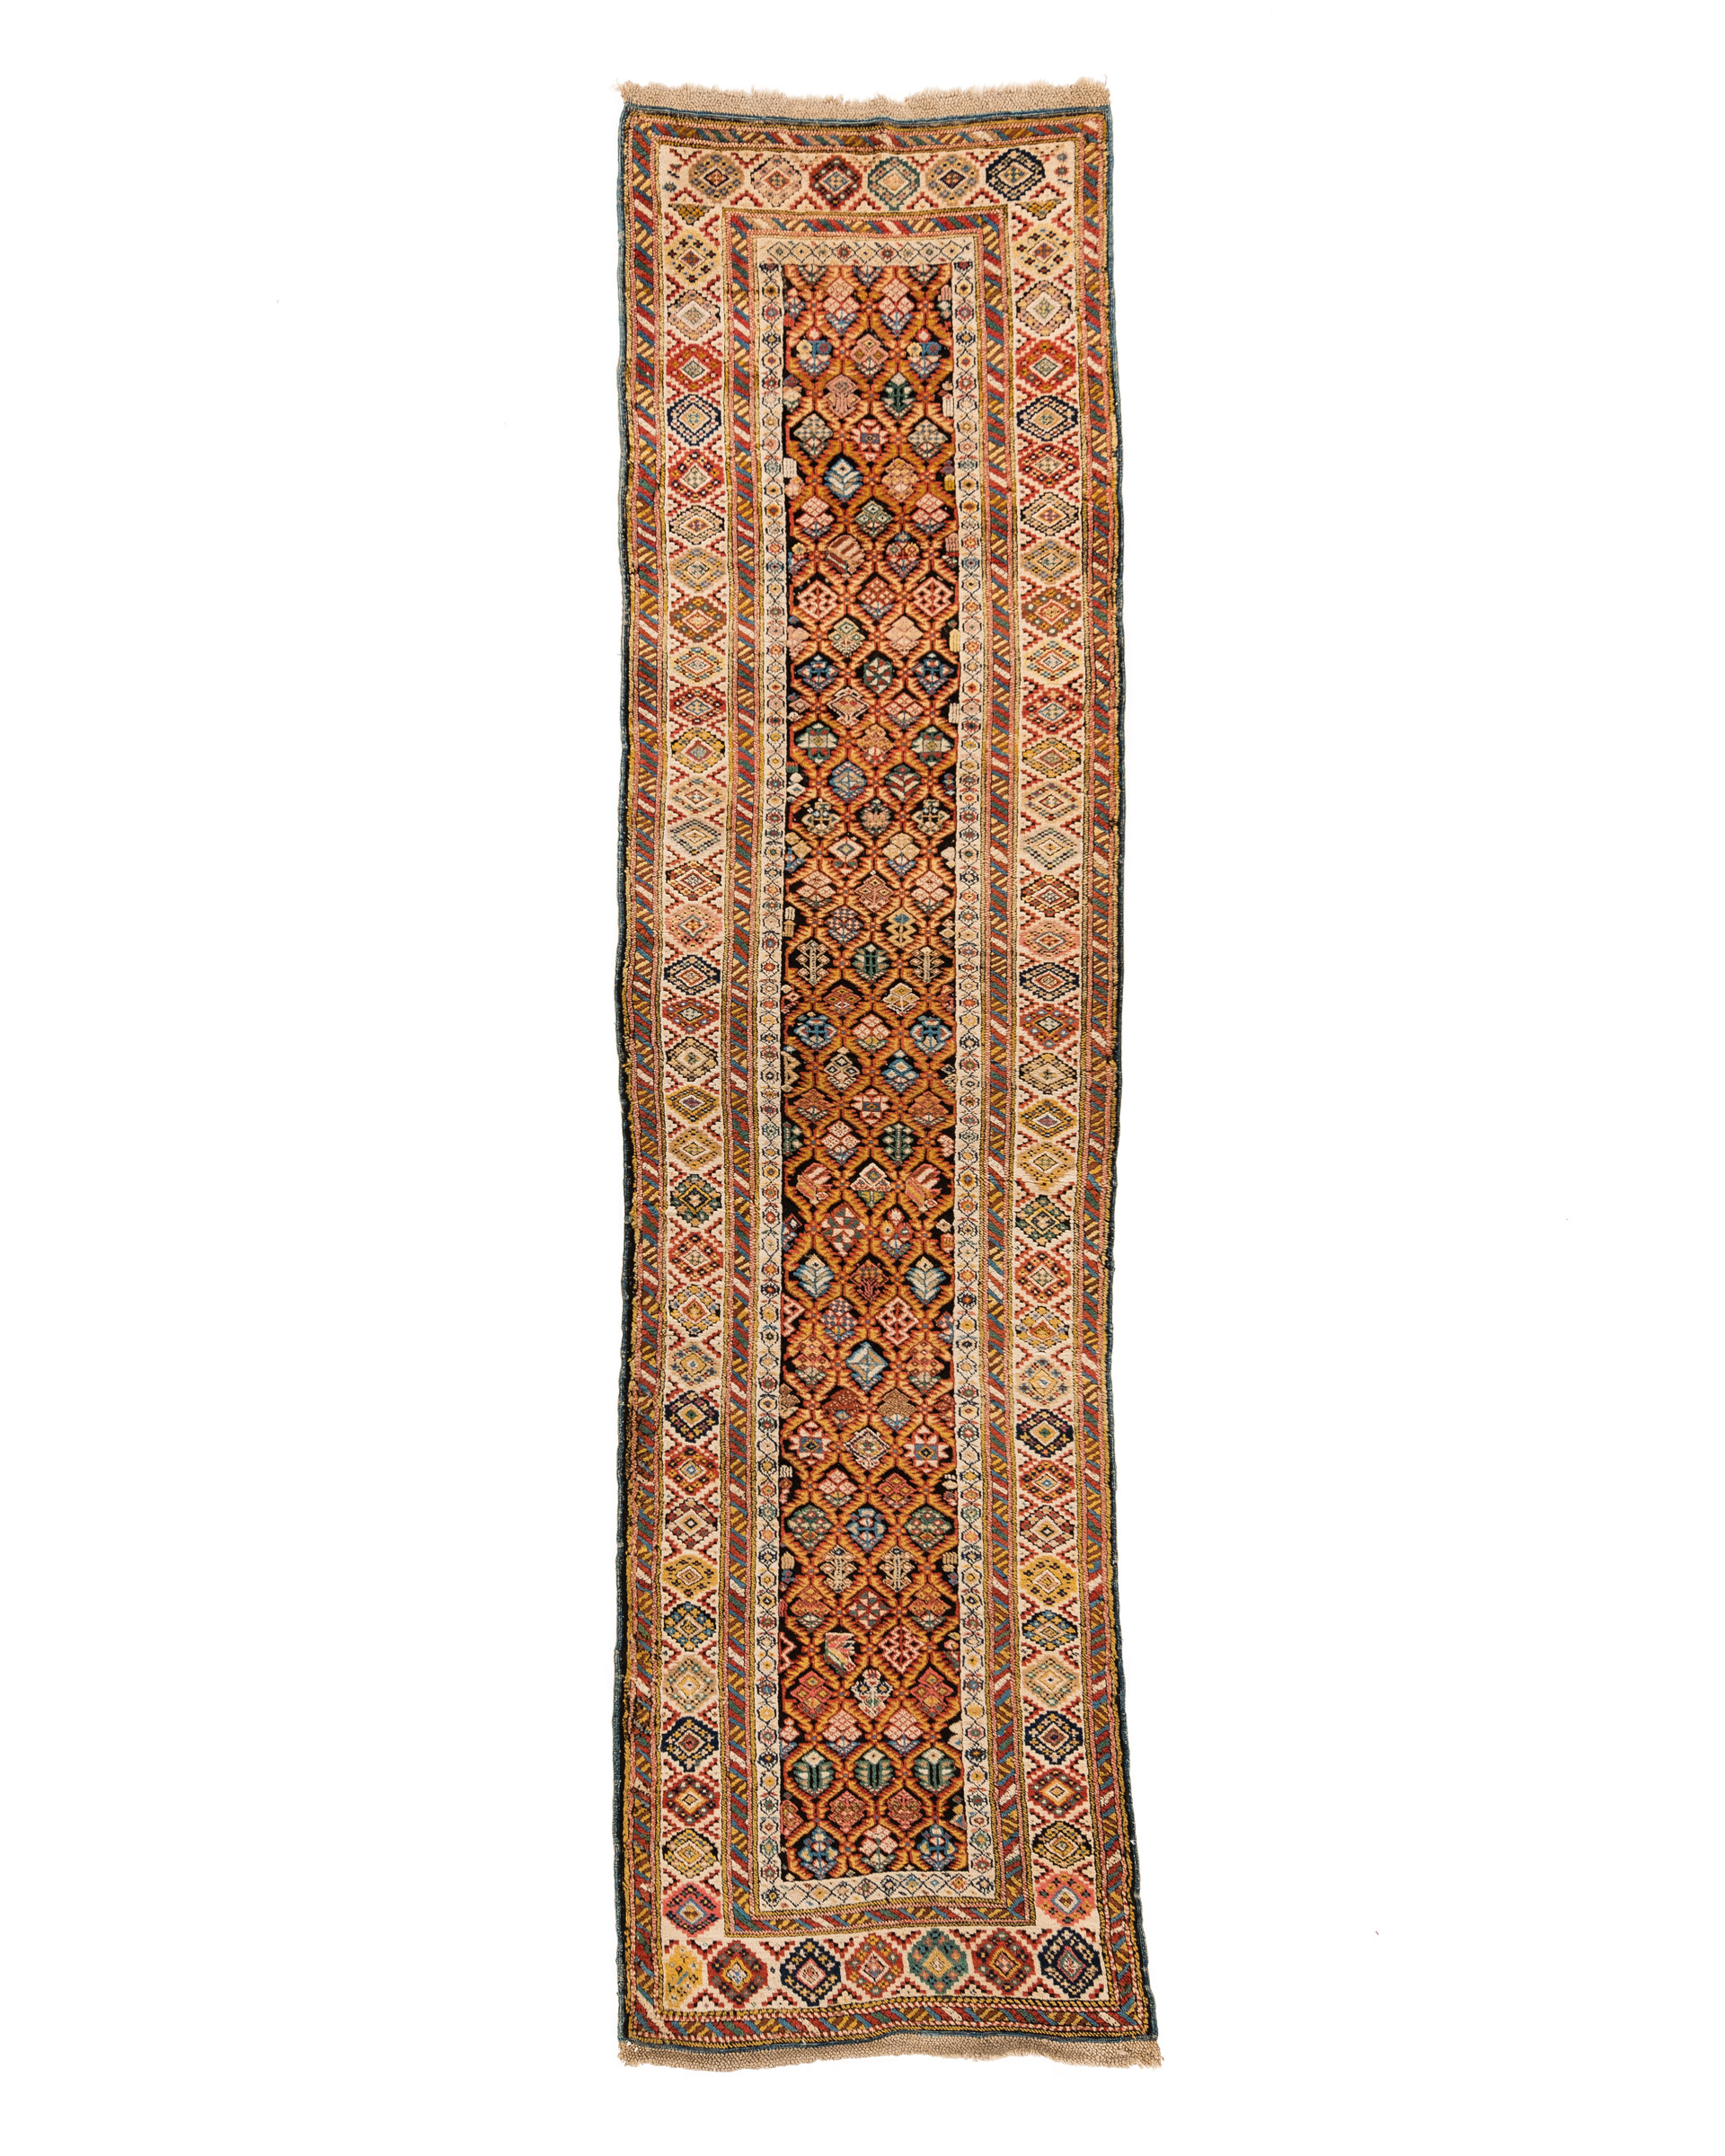 19th century Caucasian Kuba runner with a lattice design on an oxifdized brown field that is framed by an ivory border.